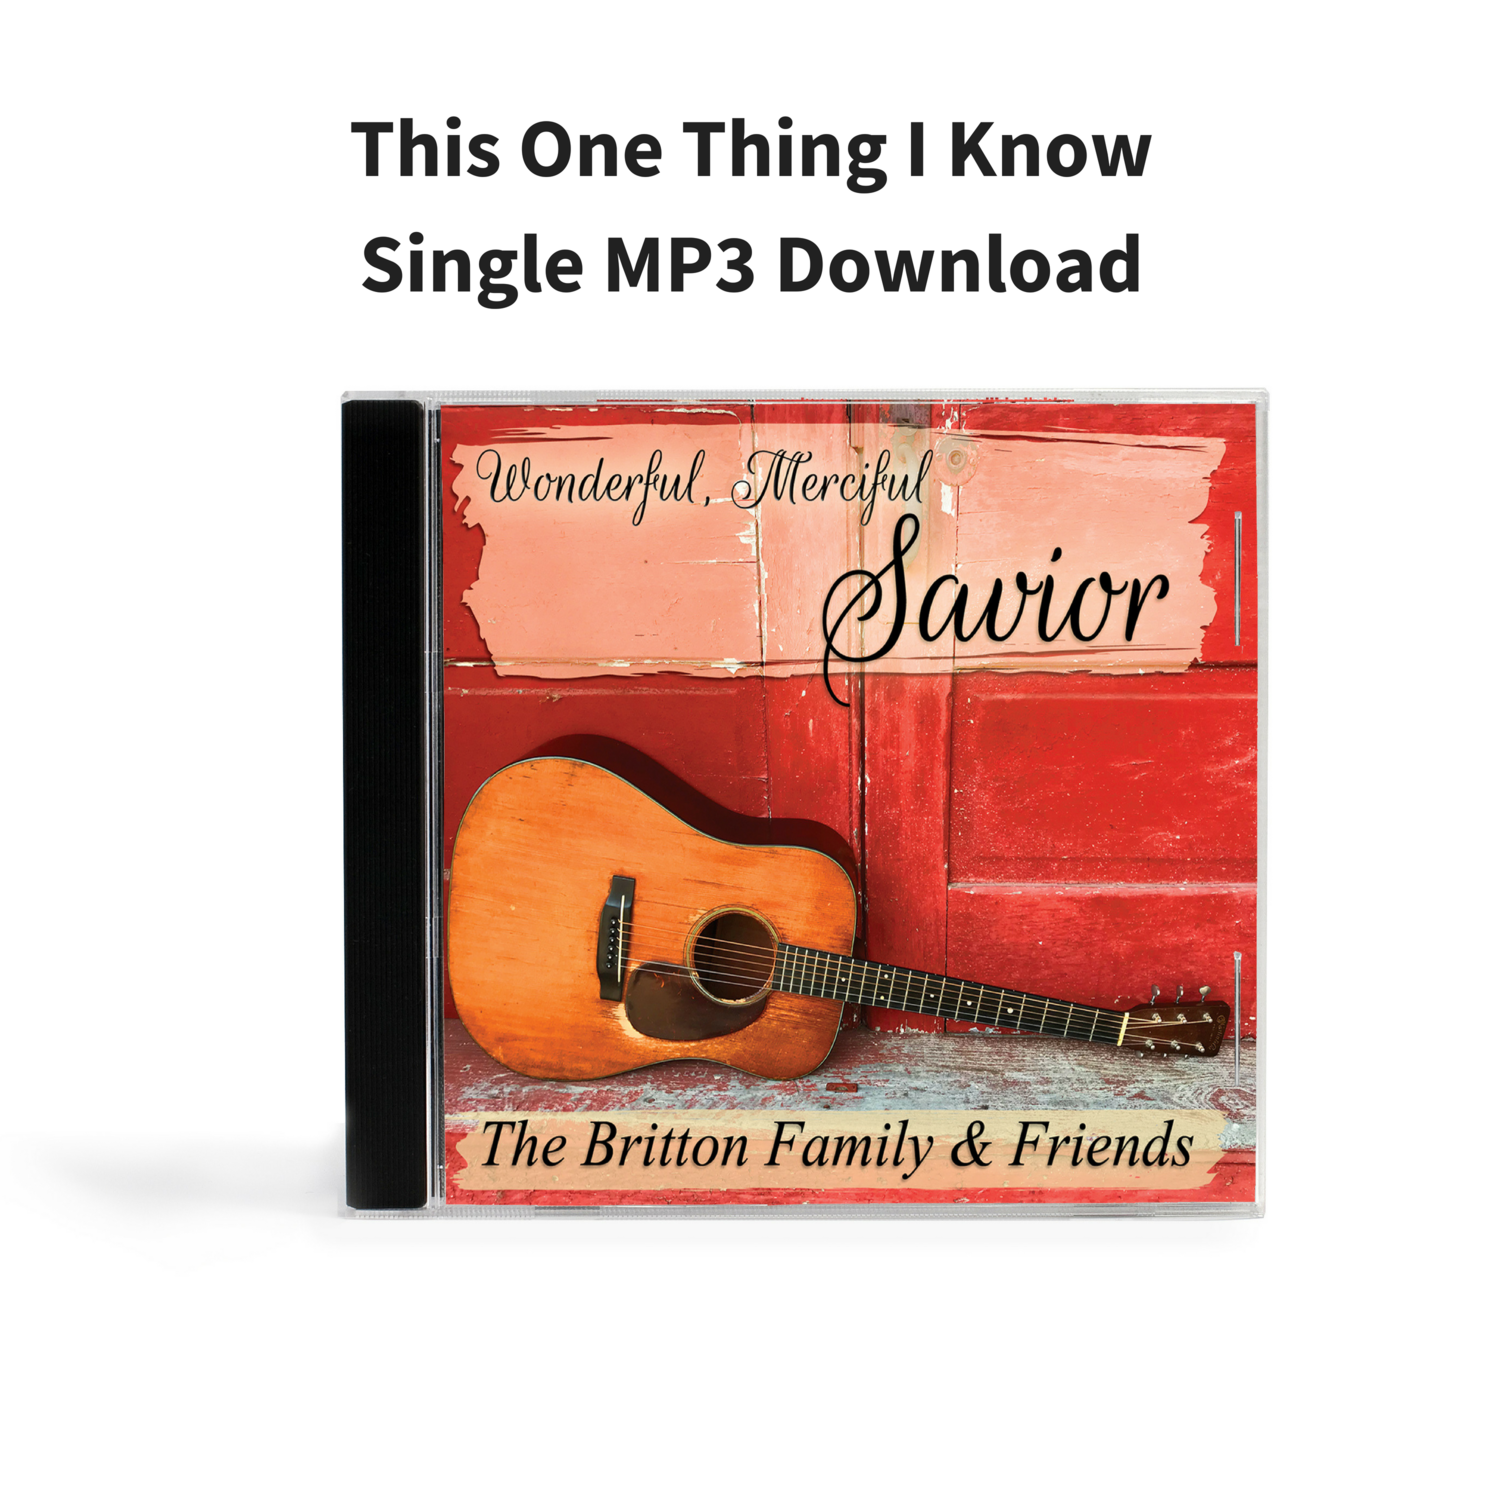 This One Thing I Know - Single MP3 Download